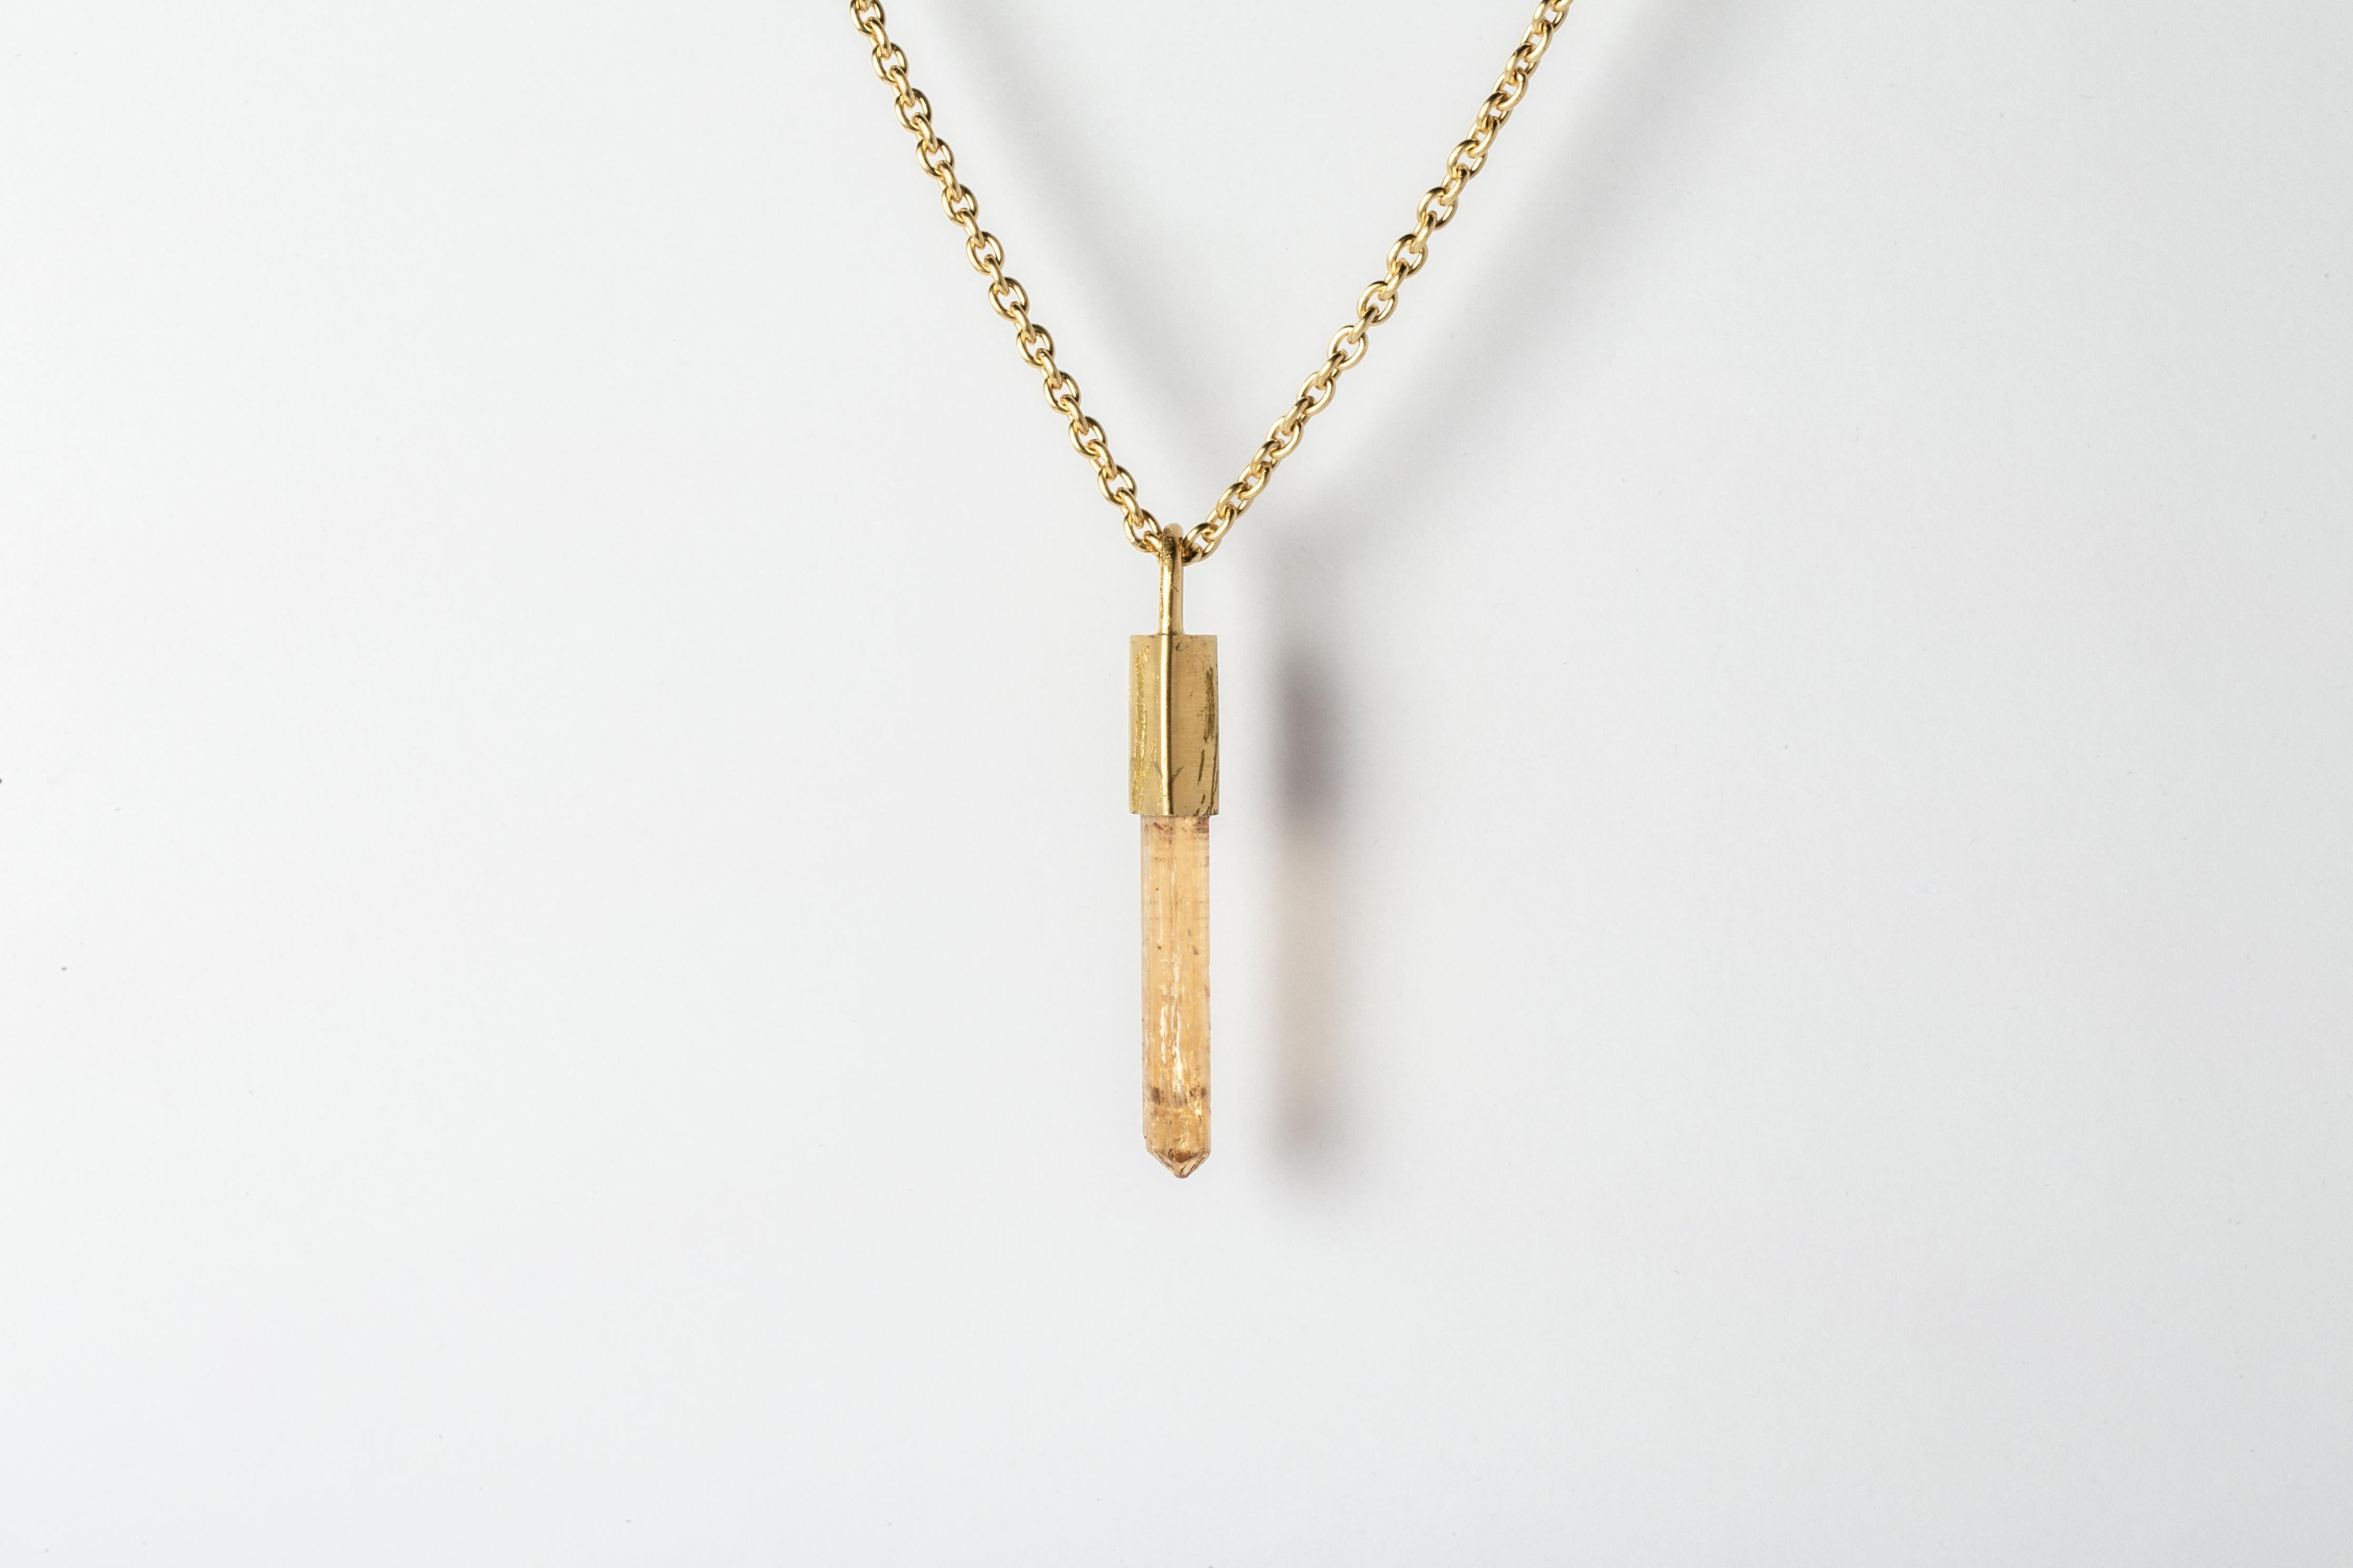 Necklace made in electroplated brass with 18k gold, electroplated sterling silver with 18k gold, and a slab of rough imperial topaz. The Talisman series is an exploration into the power of natural crystals. Tools for Magic. The crystals used in